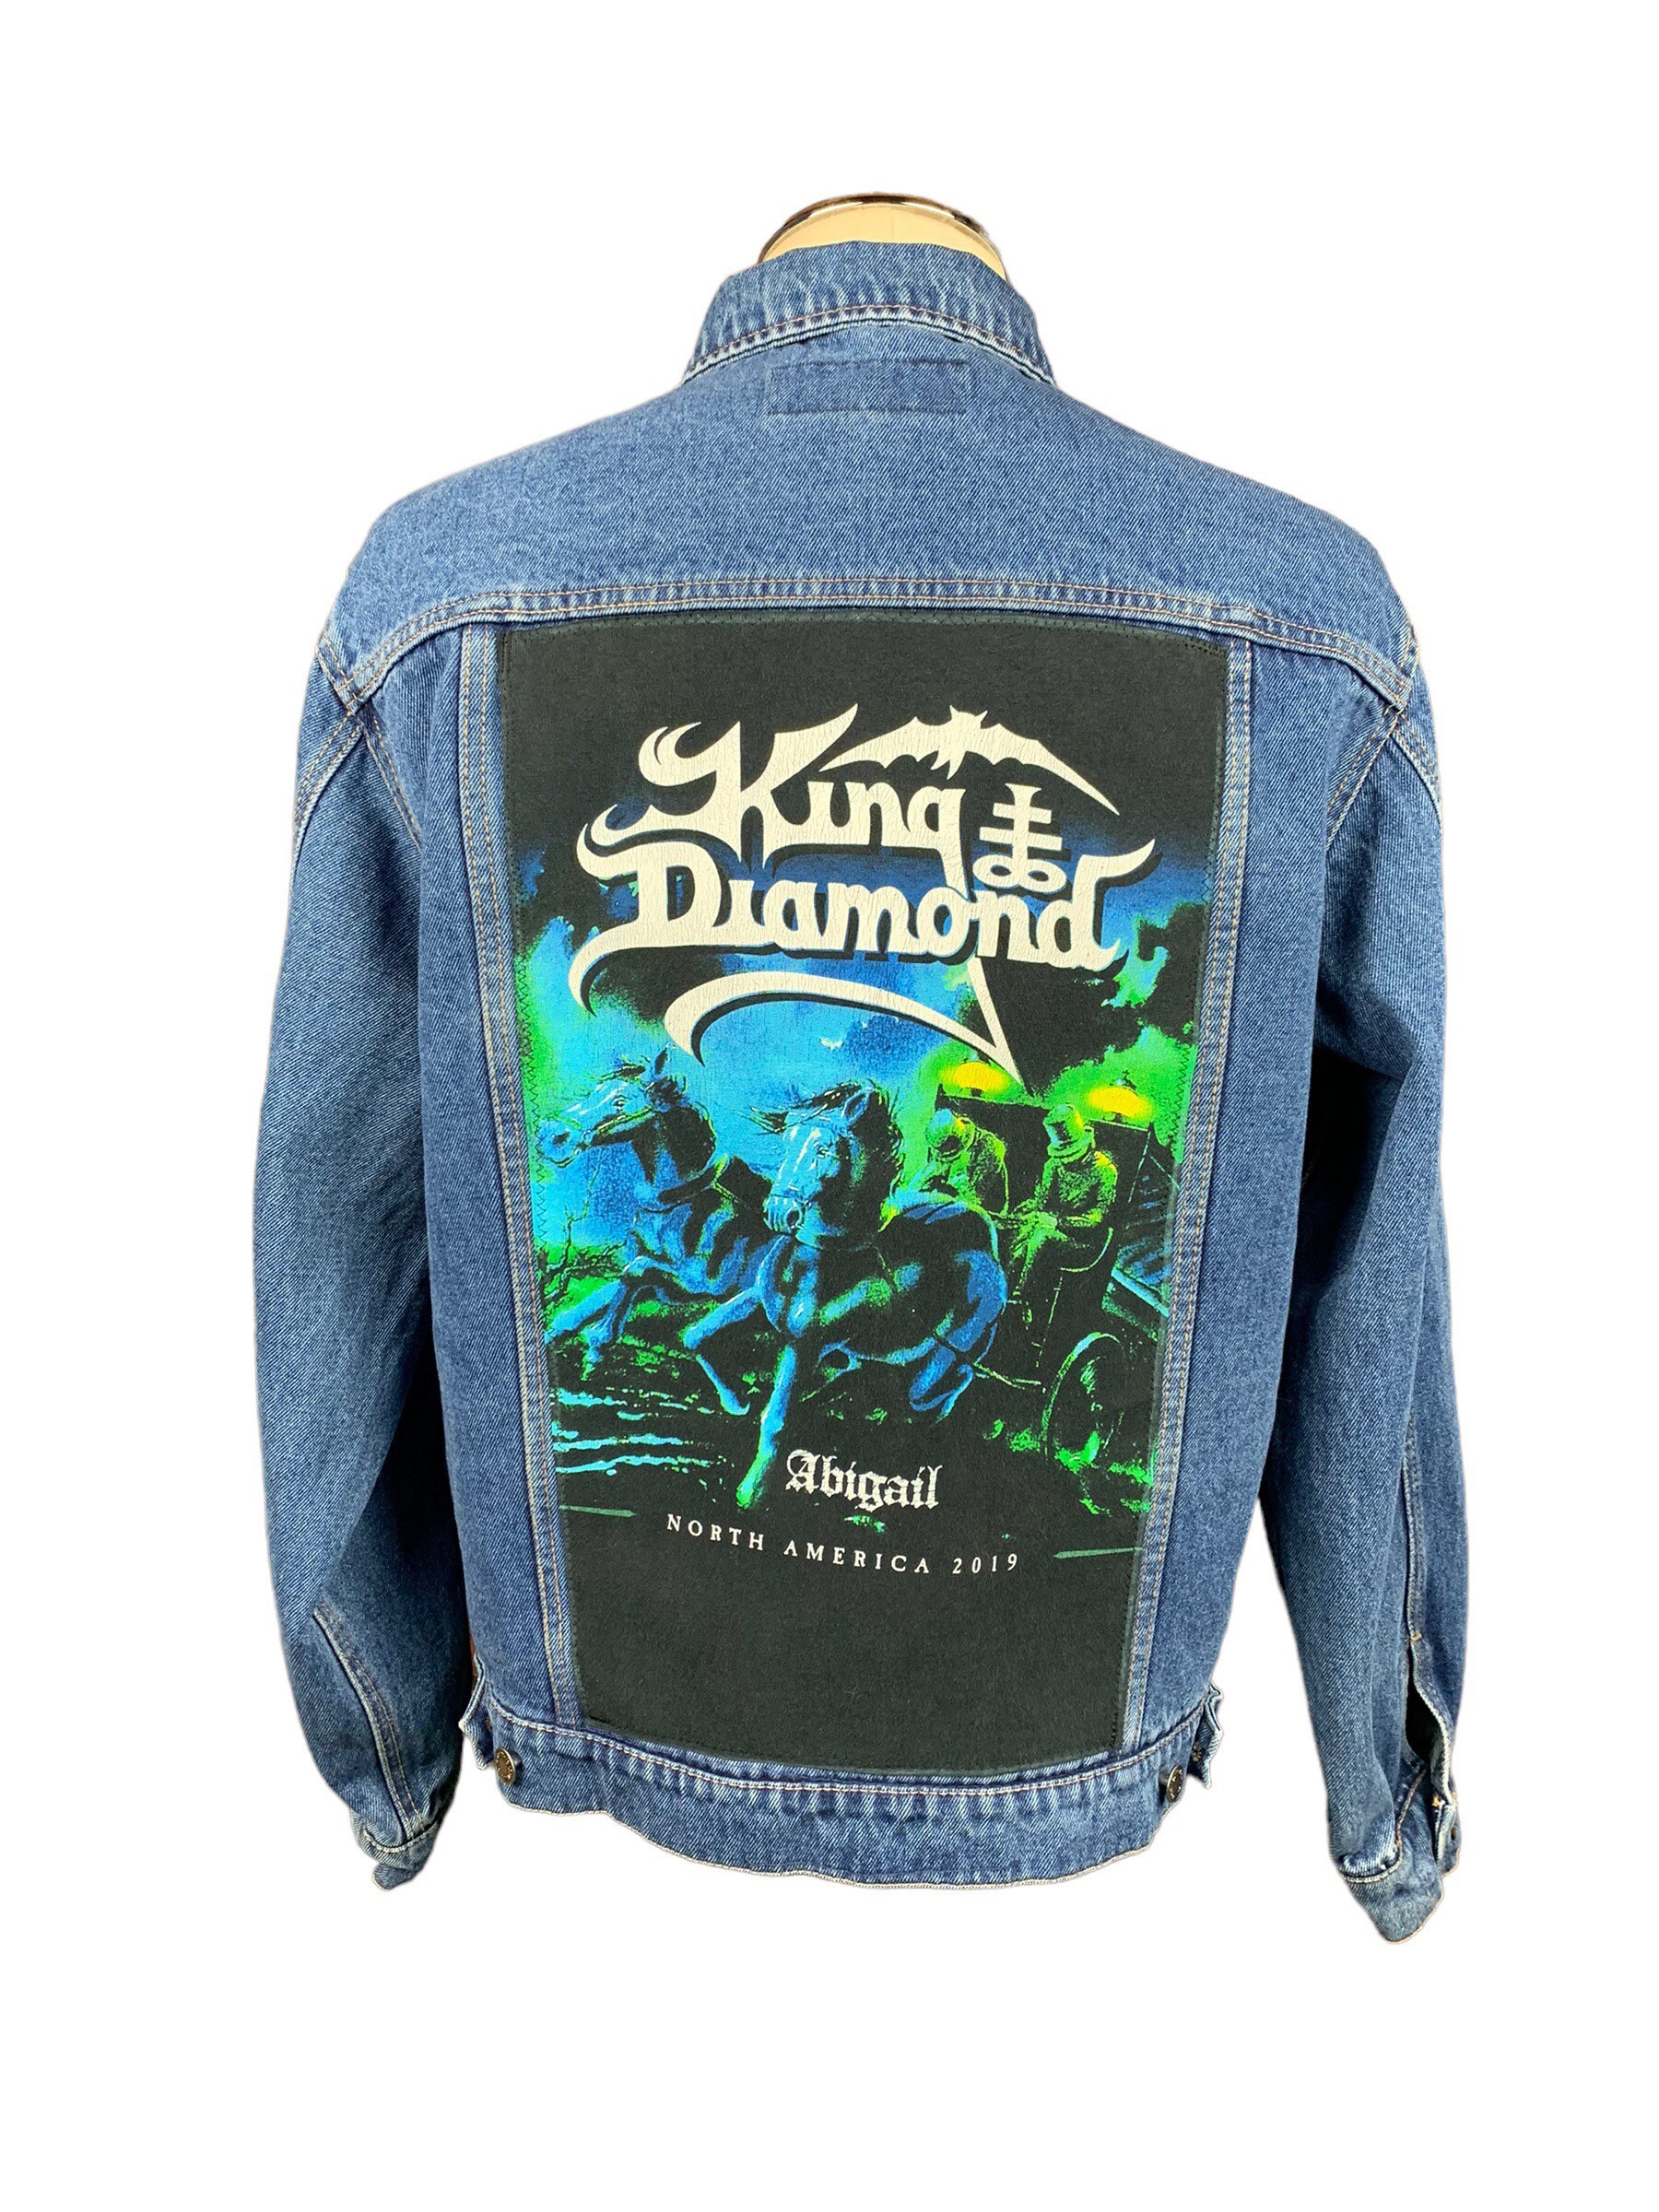 Custom Battle Jacket w/ Your Personal Patch Collection Heavy Metal Rock  Thrash 2